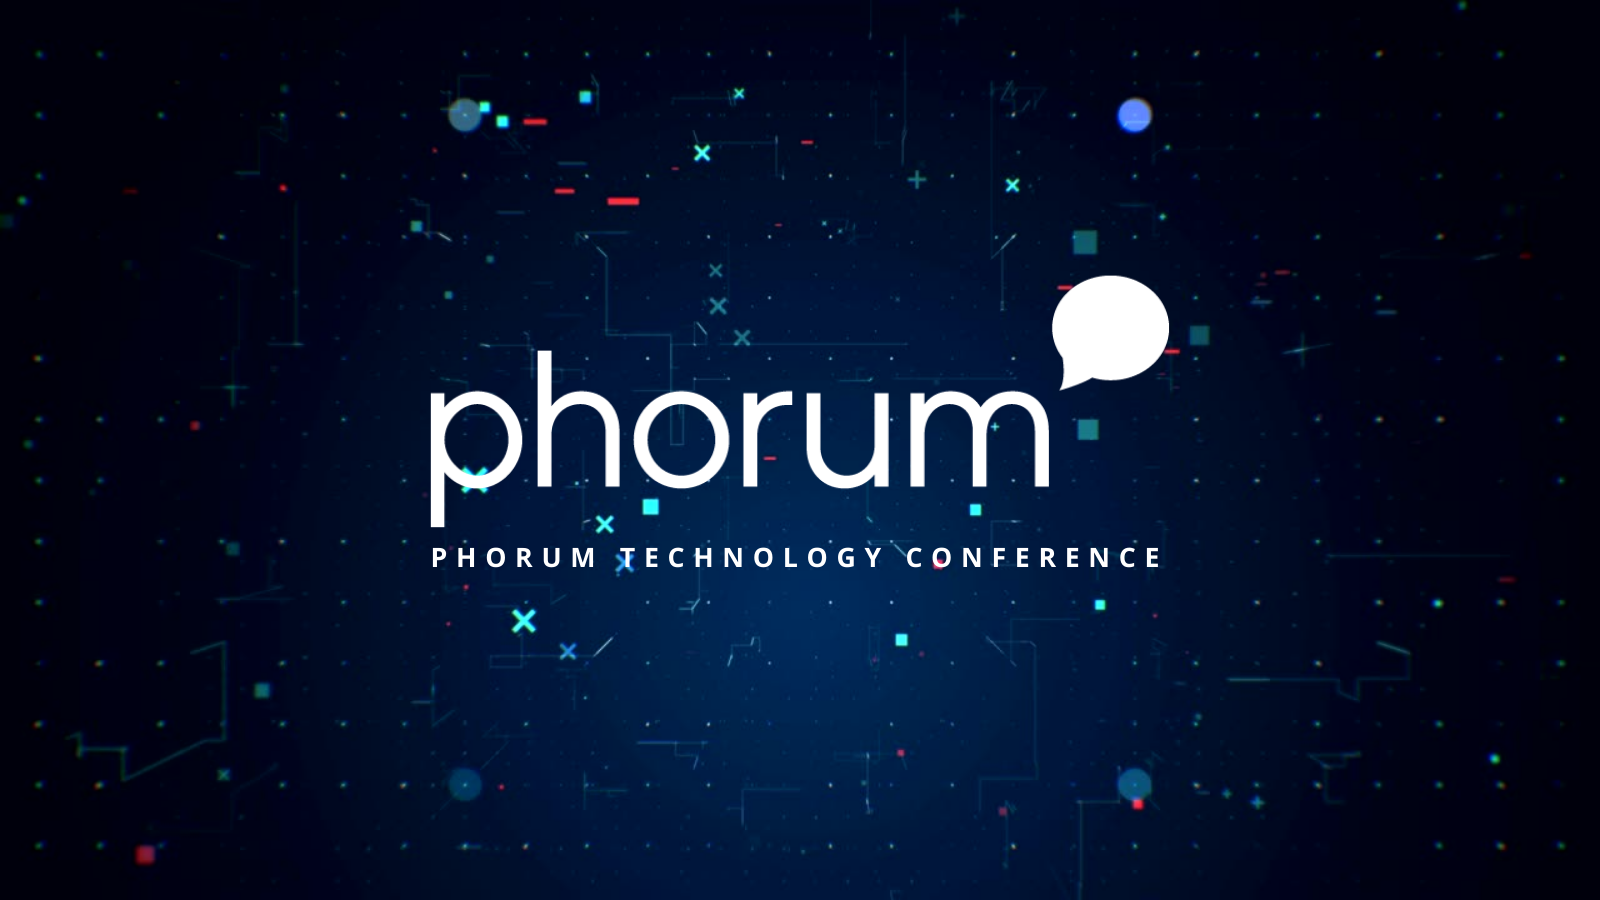 Shares the branding of the PACT Phorum Technology Conference